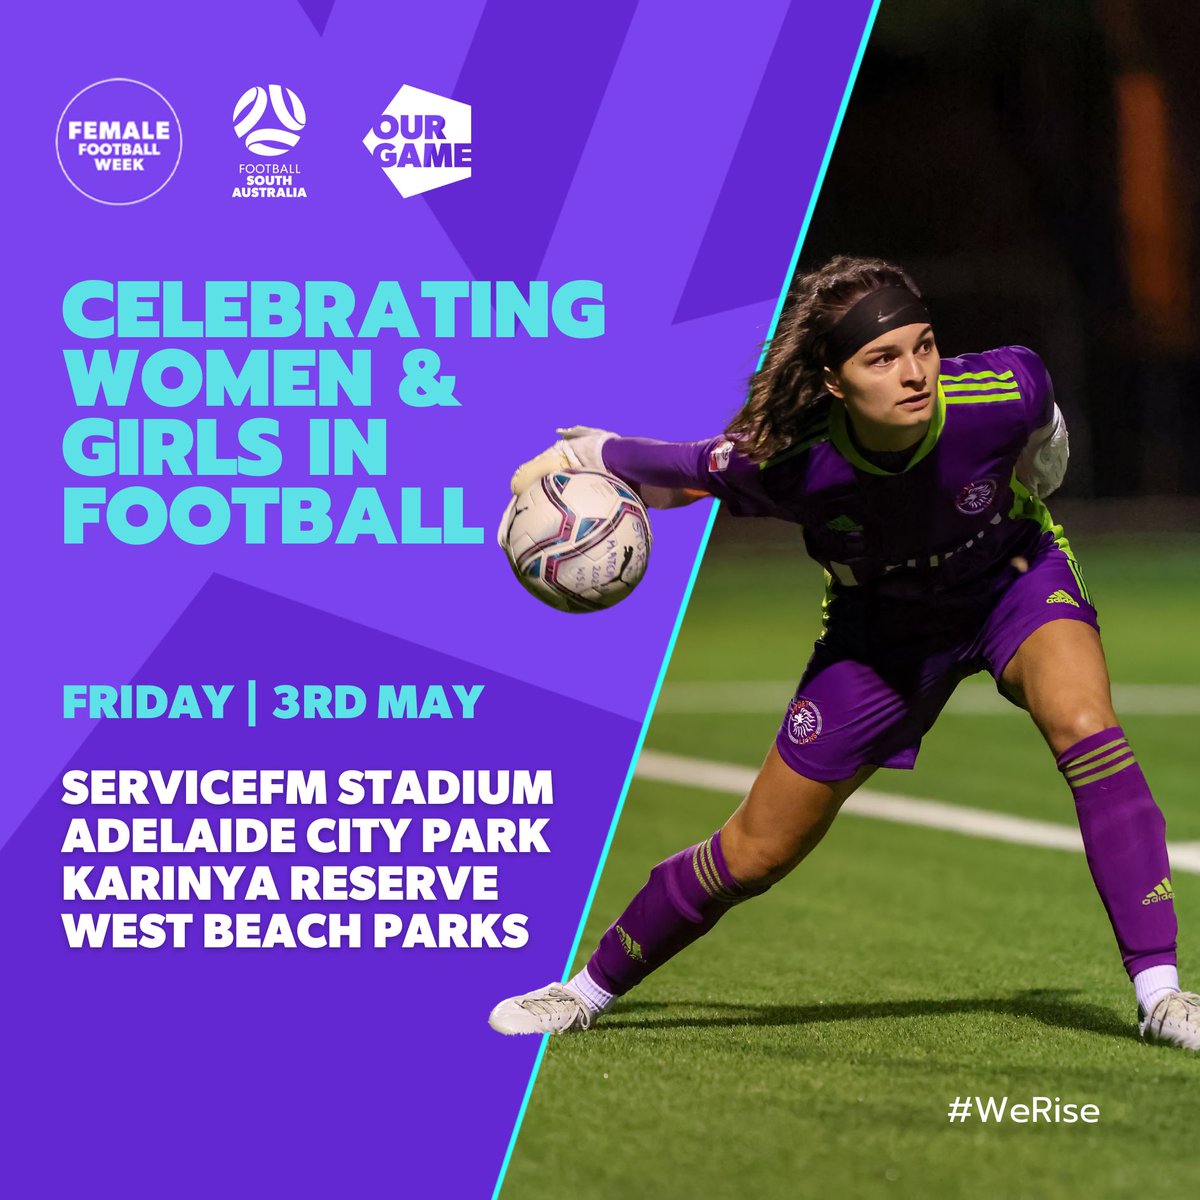 It's Game Day for our #GoSunnySolarWNPLSA! Head out to a game and support Women's Football. What's On ➡️ bit.ly/4bieWBH #FemaleFootballWeek #WeRise